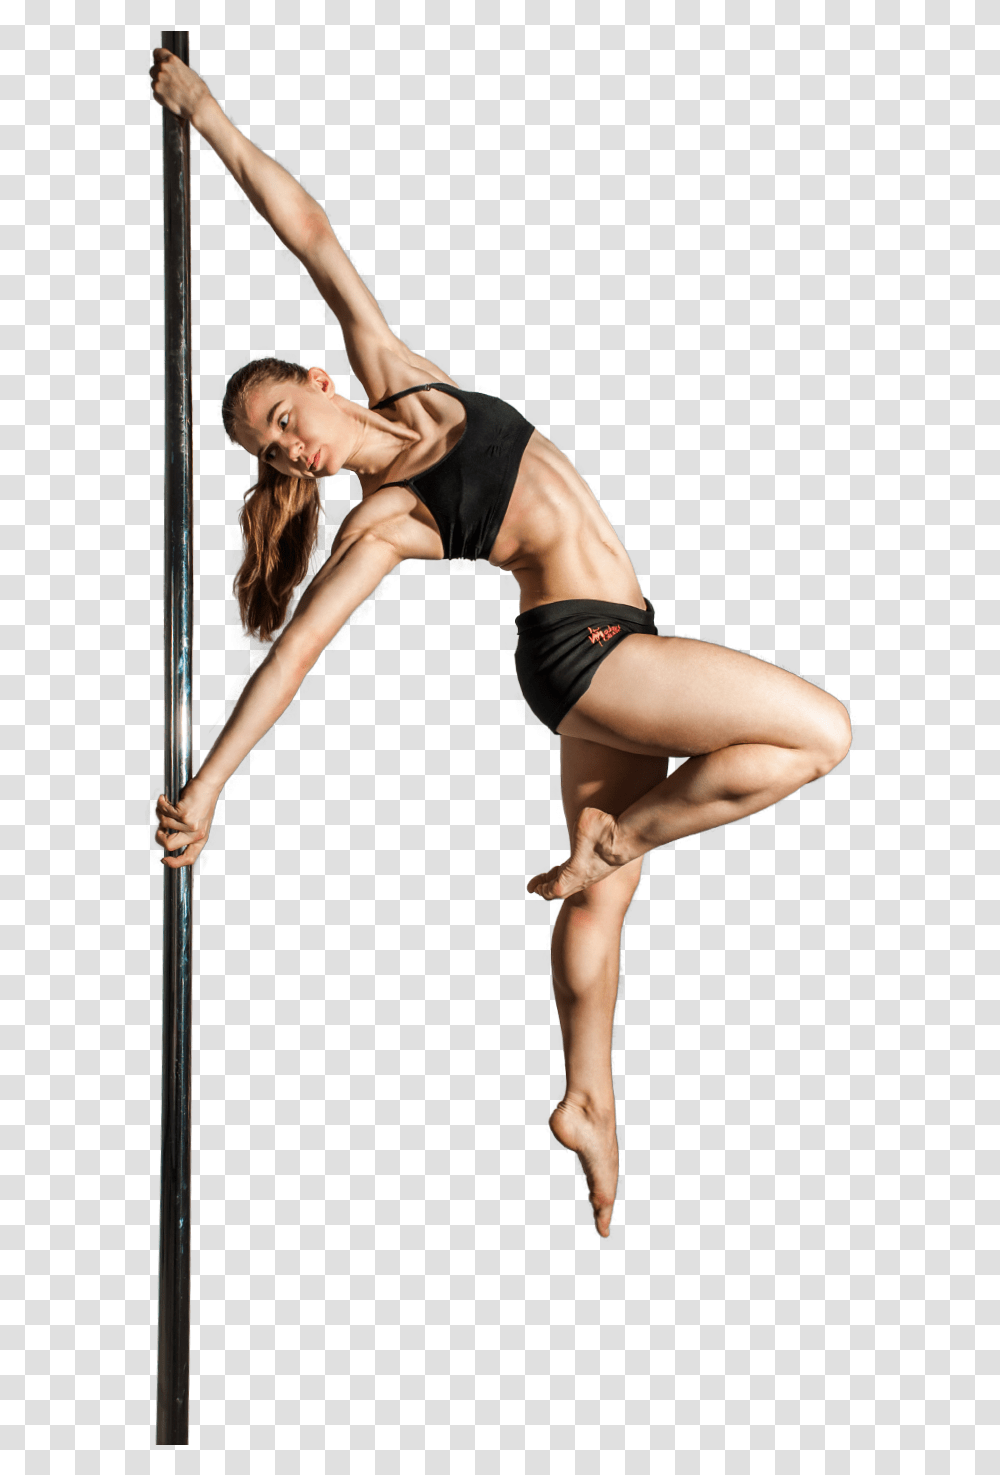 Shoulder Pole Dance Knee Pole Dancing Without Background, Person, Human, Dance Pose, Leisure Activities Transparent Png